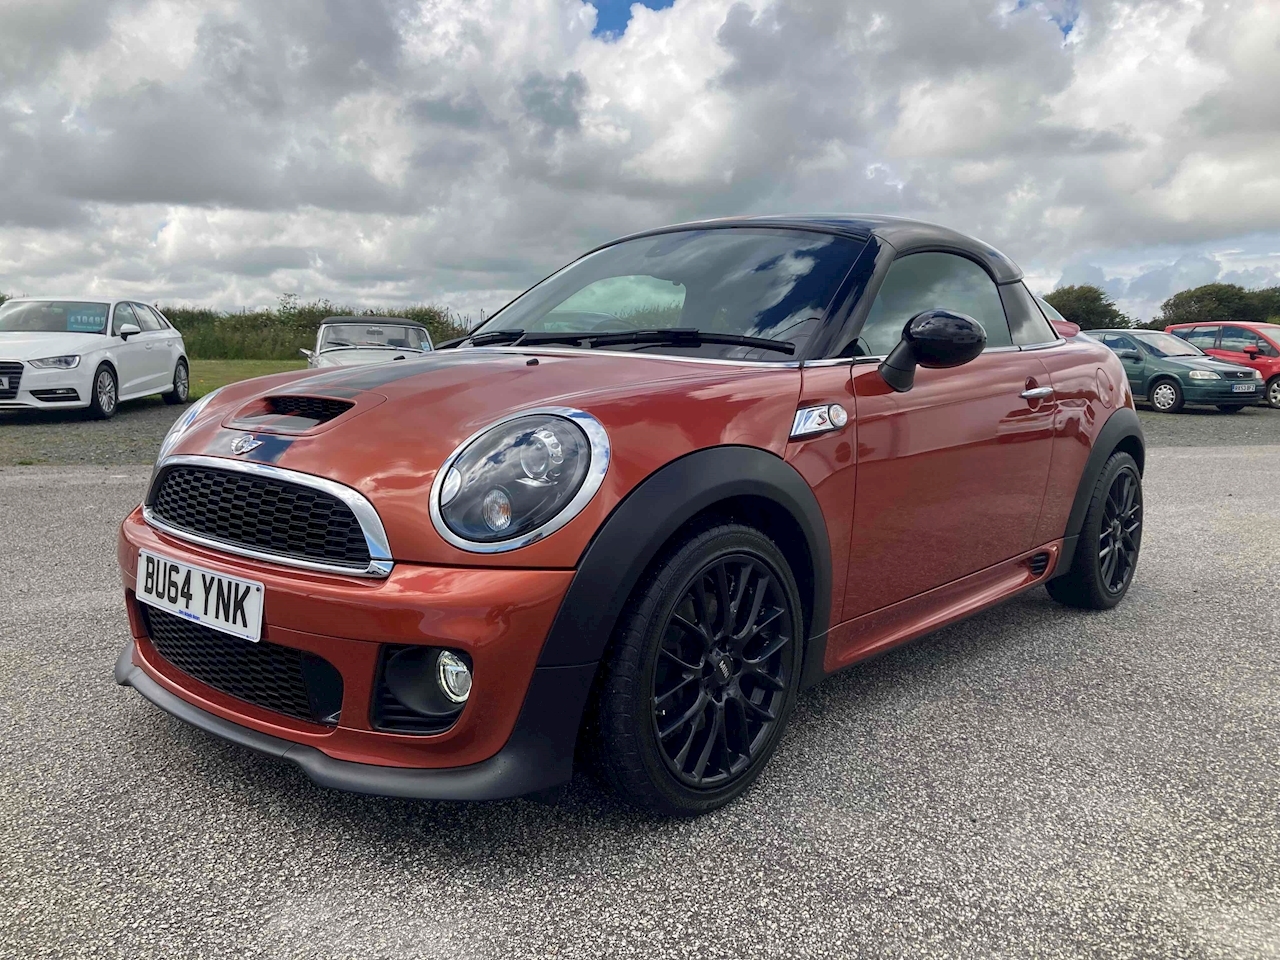 1.6 Cooper S Coupe 2dr Petrol Manual (136 g/km, 190 bhp)